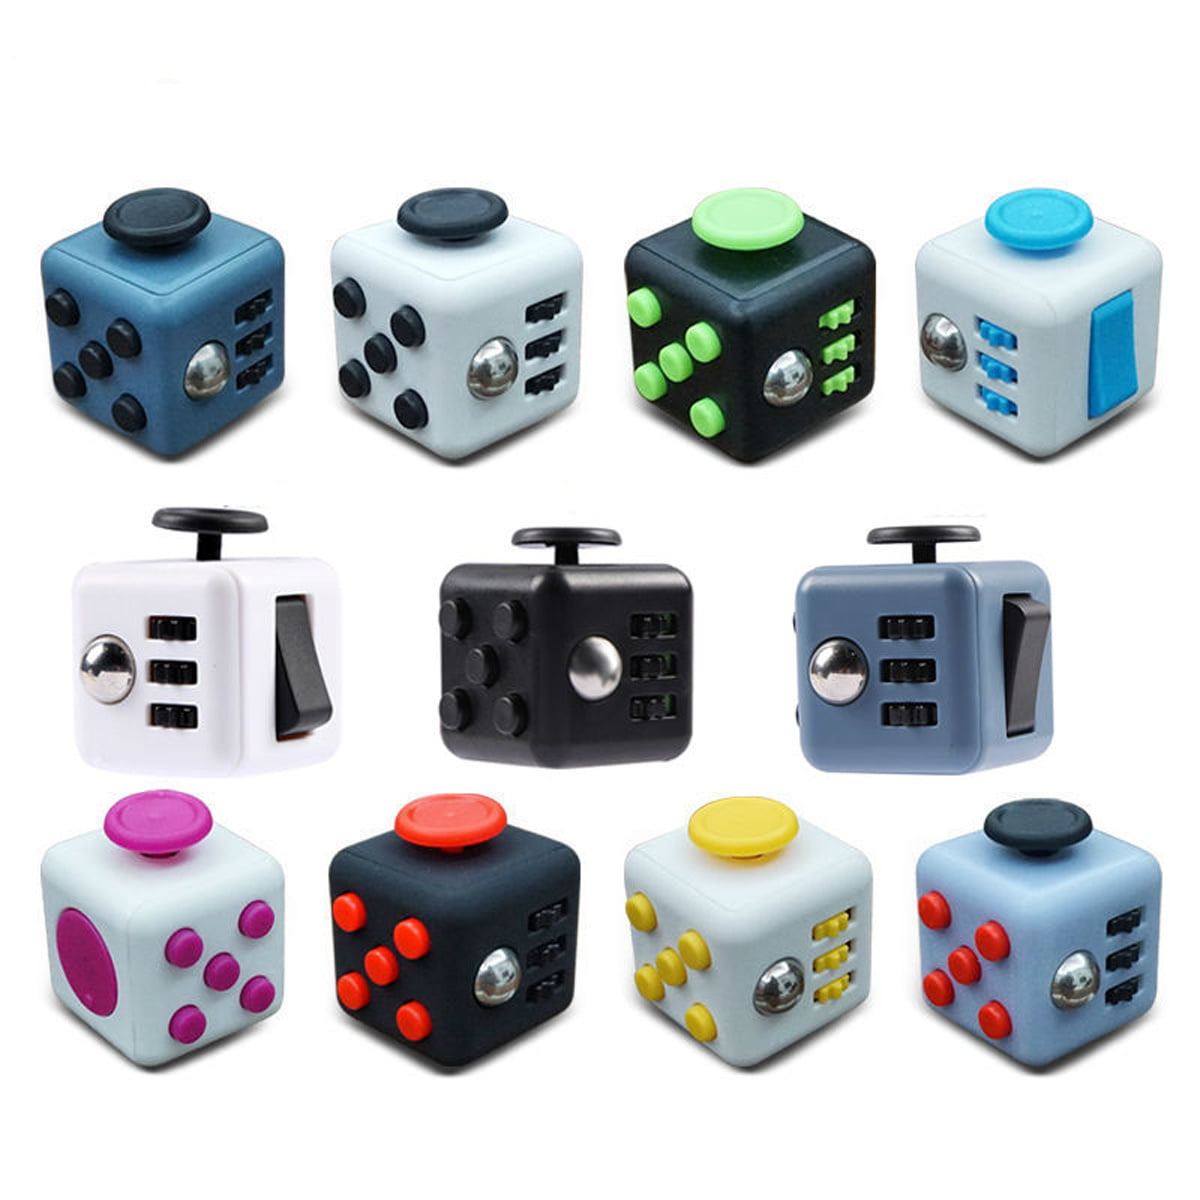 Details about   Adults Kids Focus Fidget Toy Cube Stress Anxiety Relief Desk Toy EDC 6 Sided 